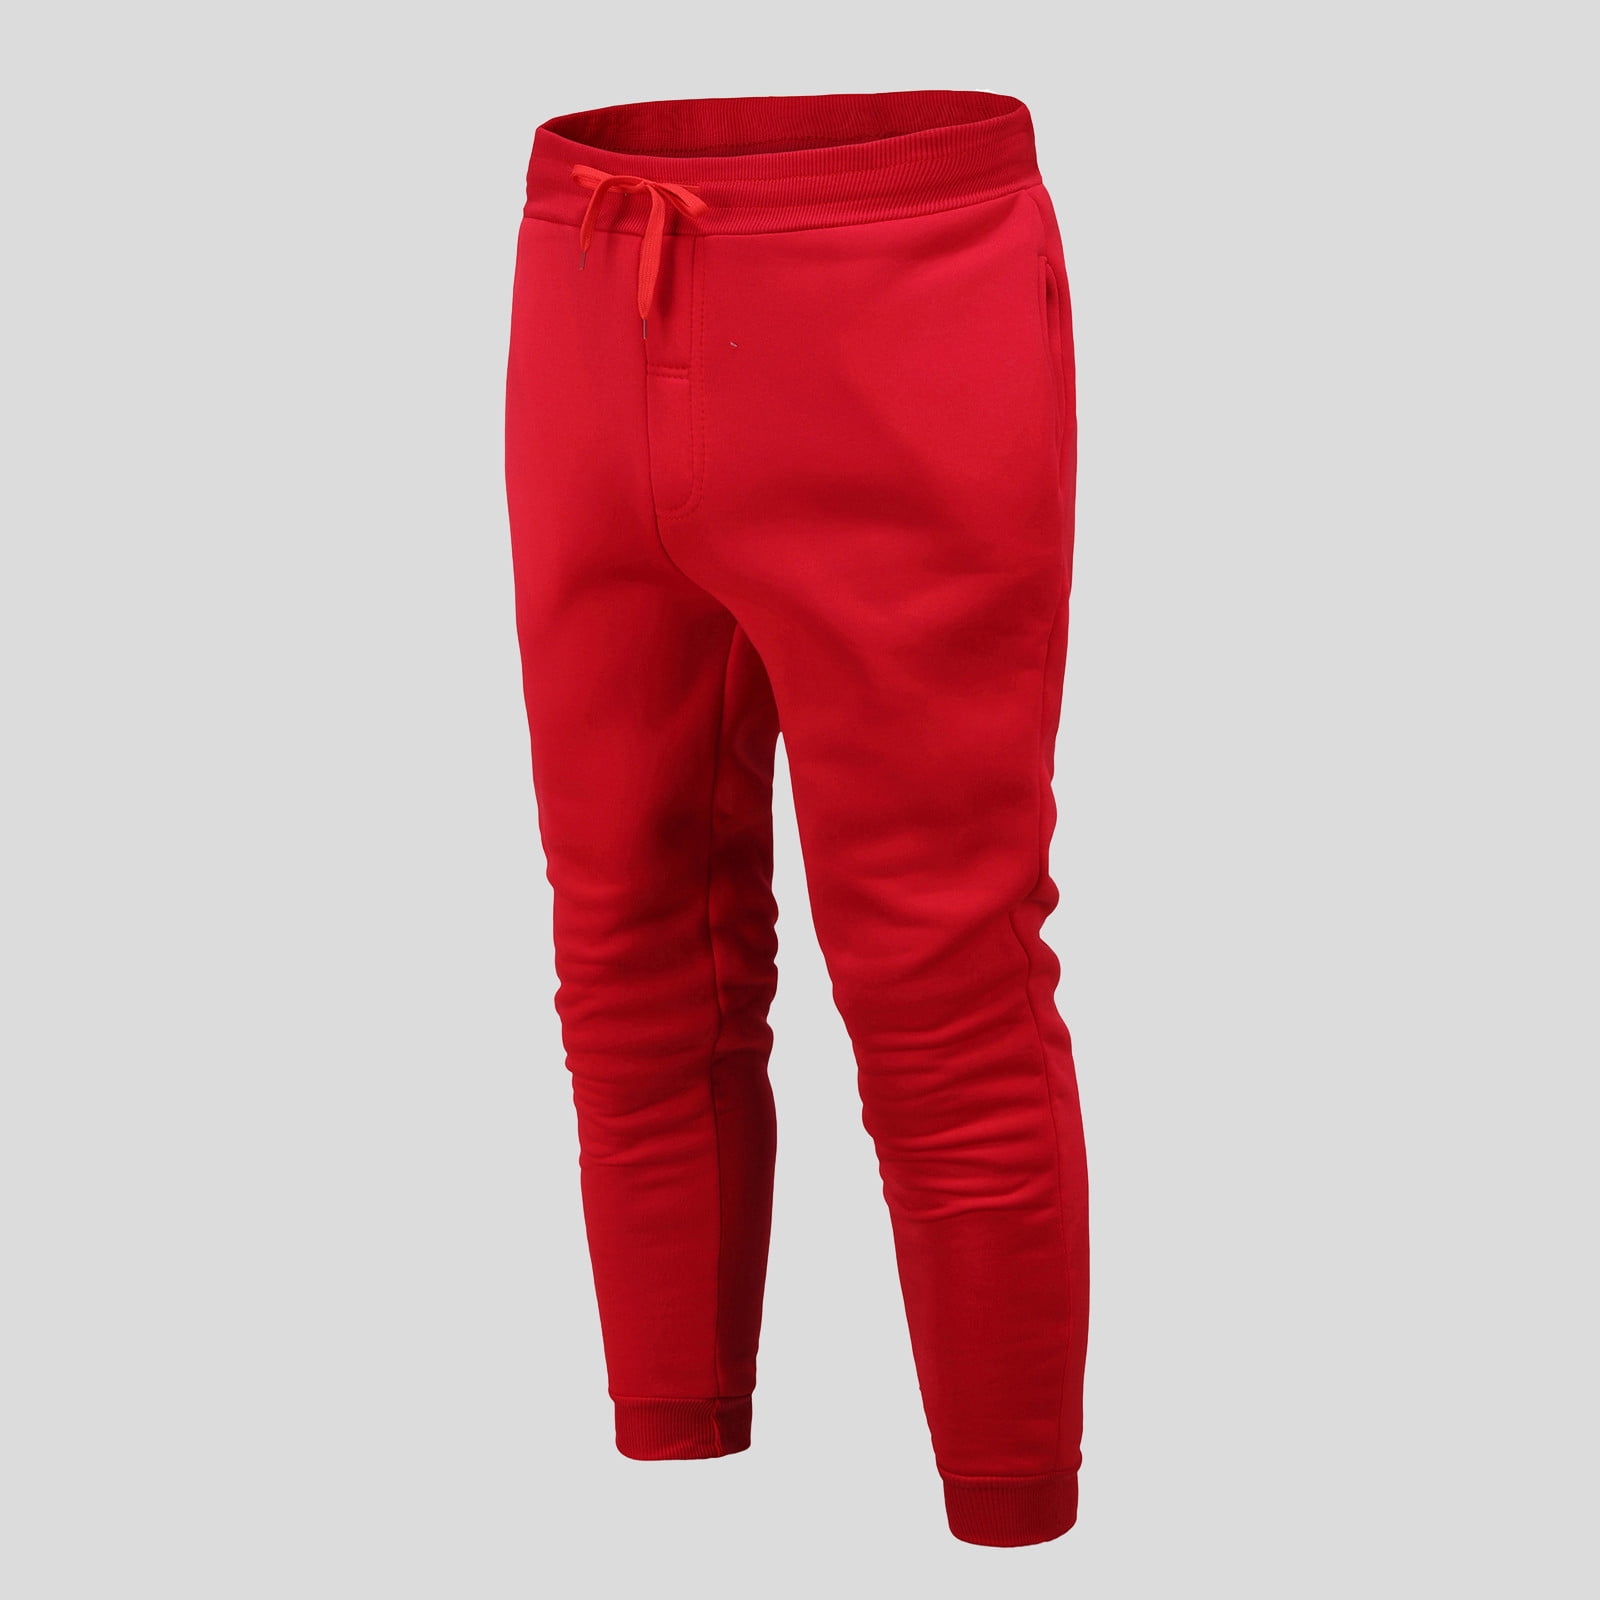 Running Solid Up Sports Color Pants Pants Lace Mens For And Sweatpants Sweater Loose Trousers Leisure High Street Red Men Autumn Fashion Winter